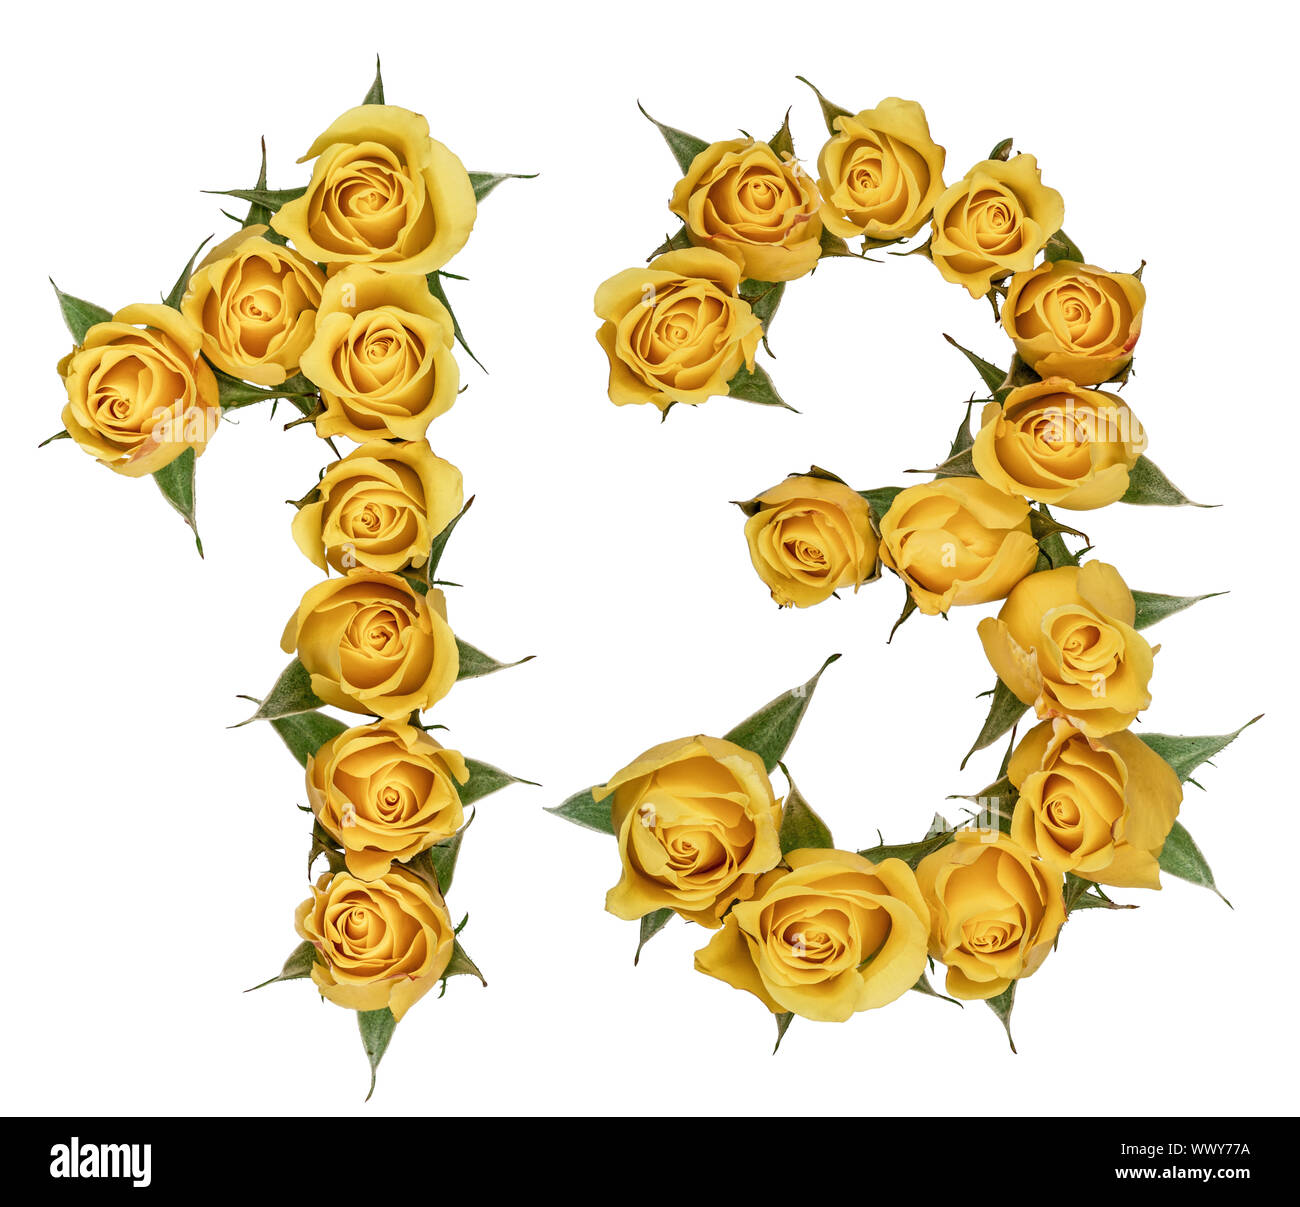 Arabic numeral 13, thirteen, from yellow flowers of rose, isolated on white background Stock Photo